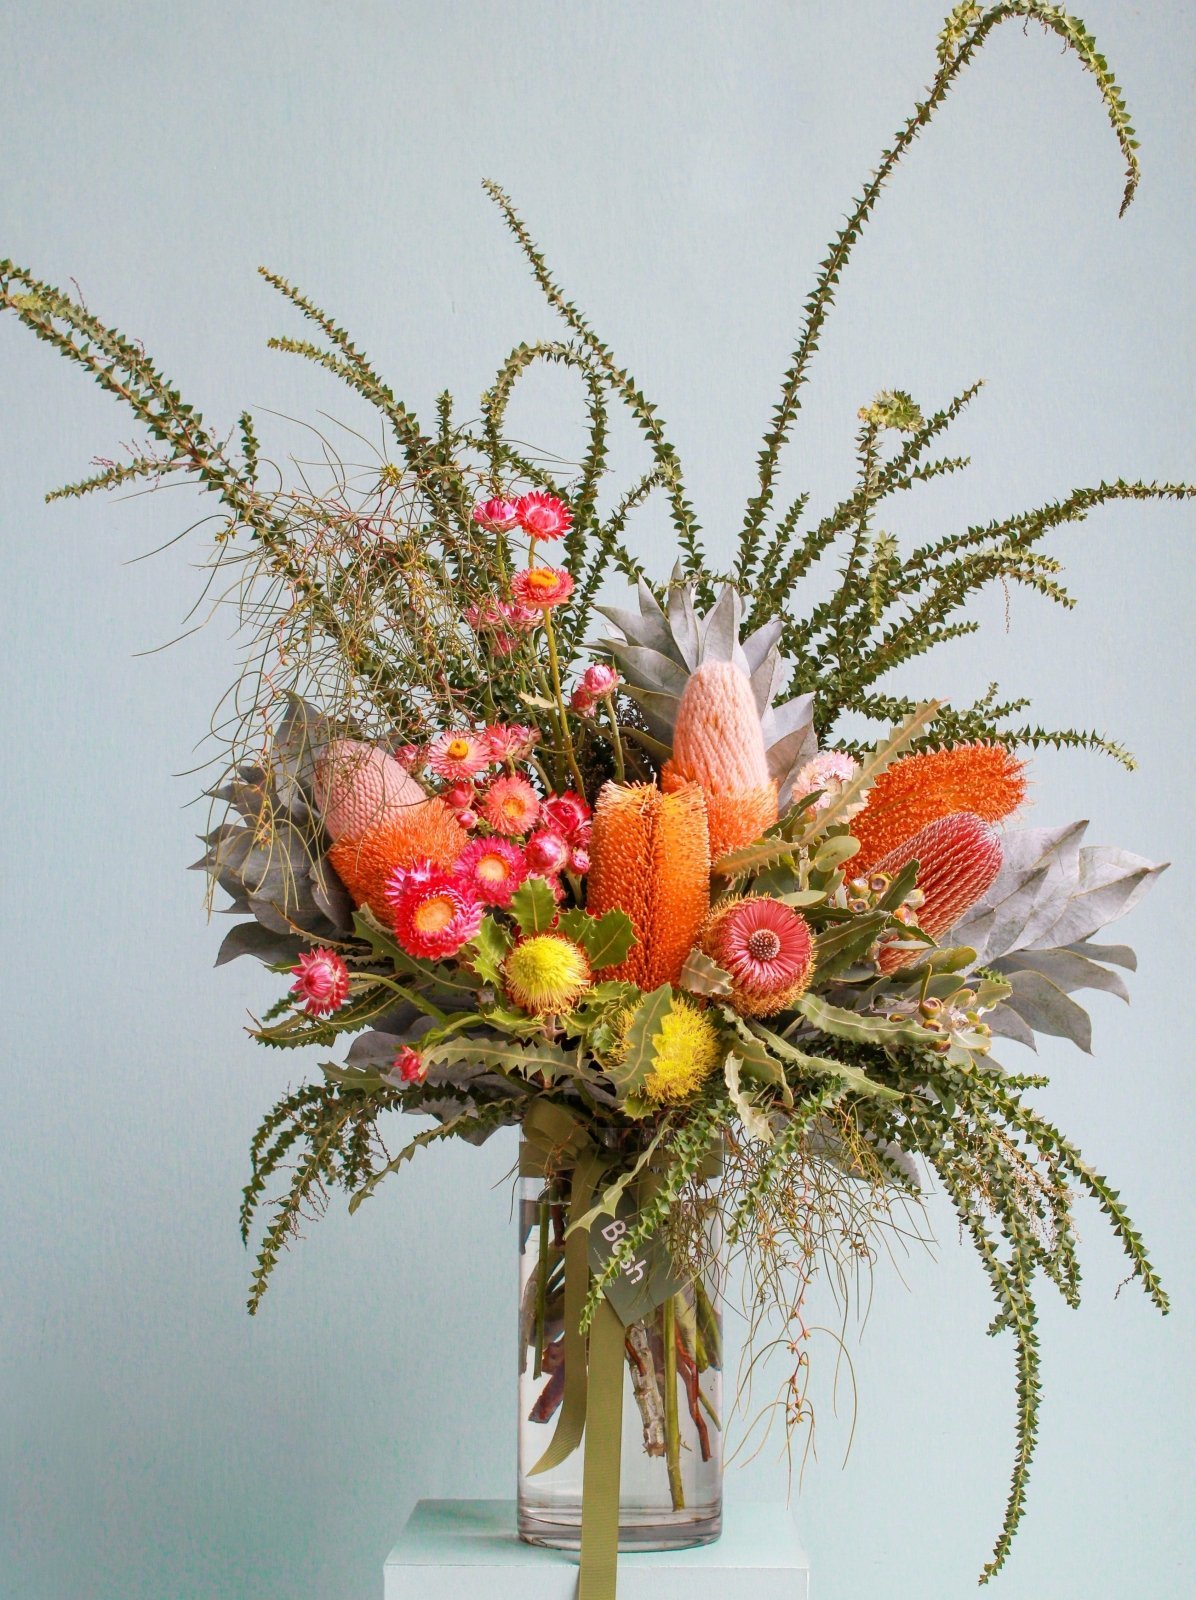 Extra large size bouquet of native flowers in a glass vase